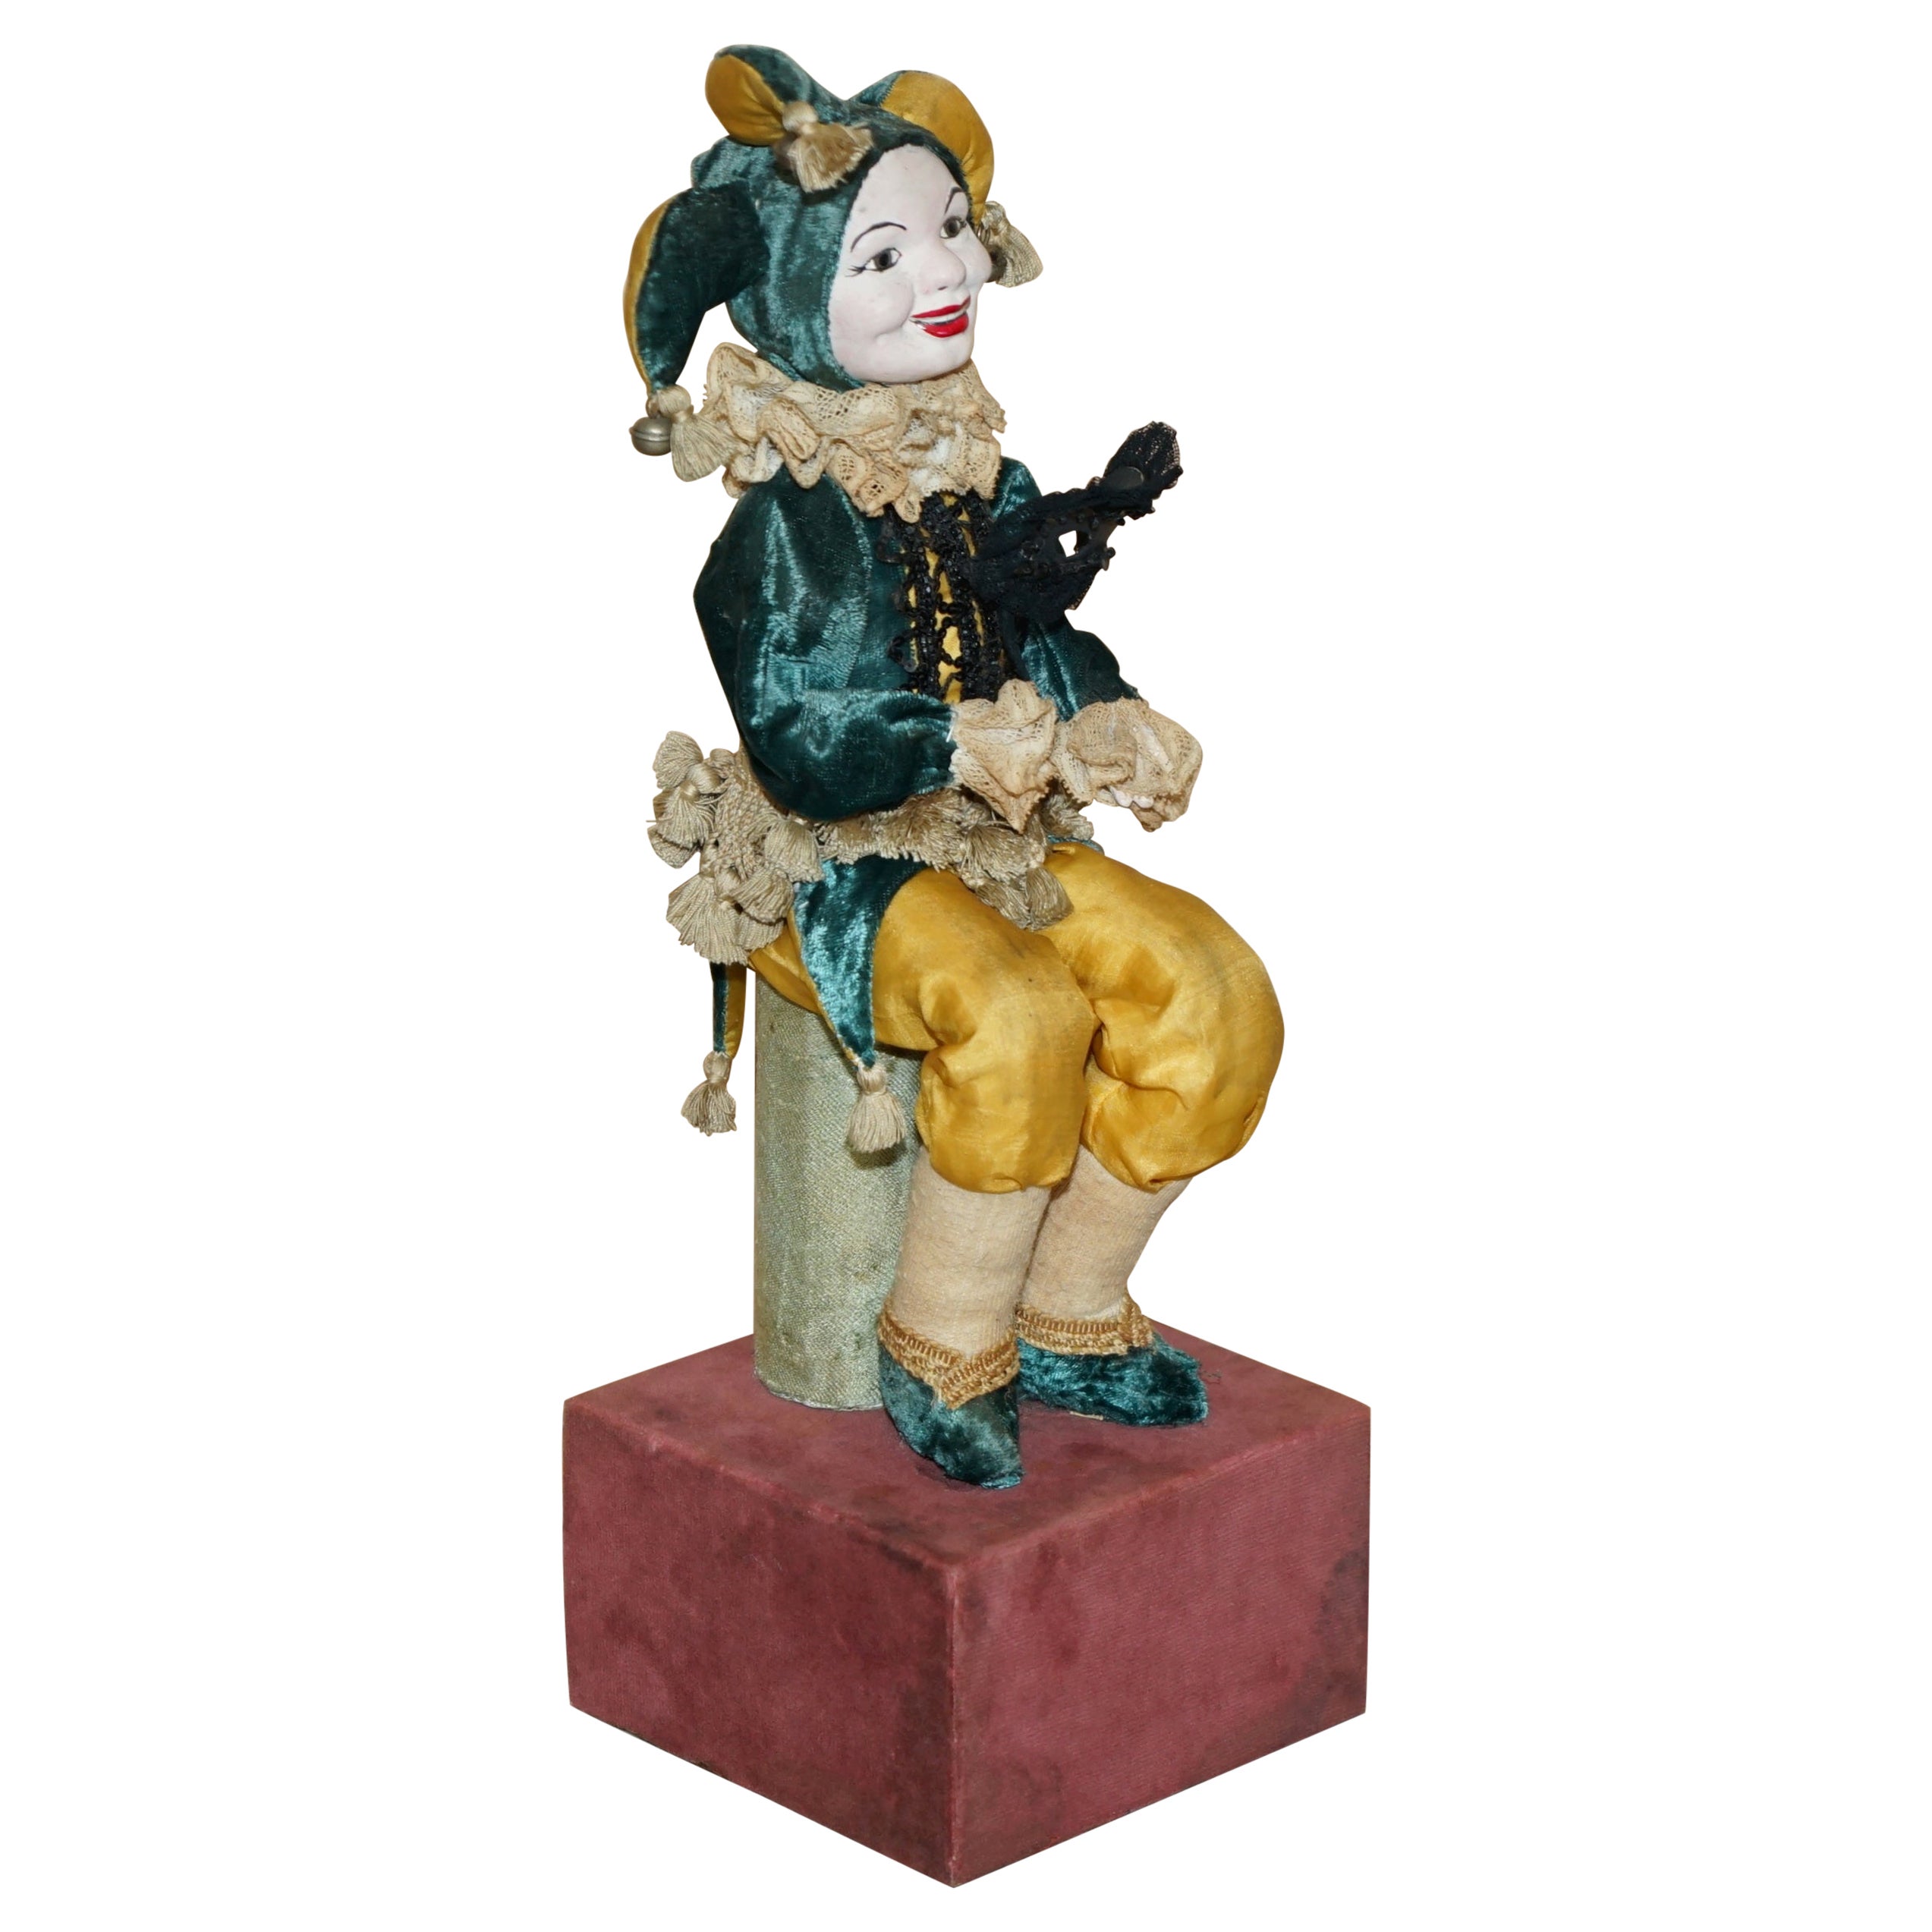 ANTiQUE FRENCH HAND MADE MUSICAL AUTOMATON JESTER CLOWN THAT PLAYS MUSIC & MOVES For Sale